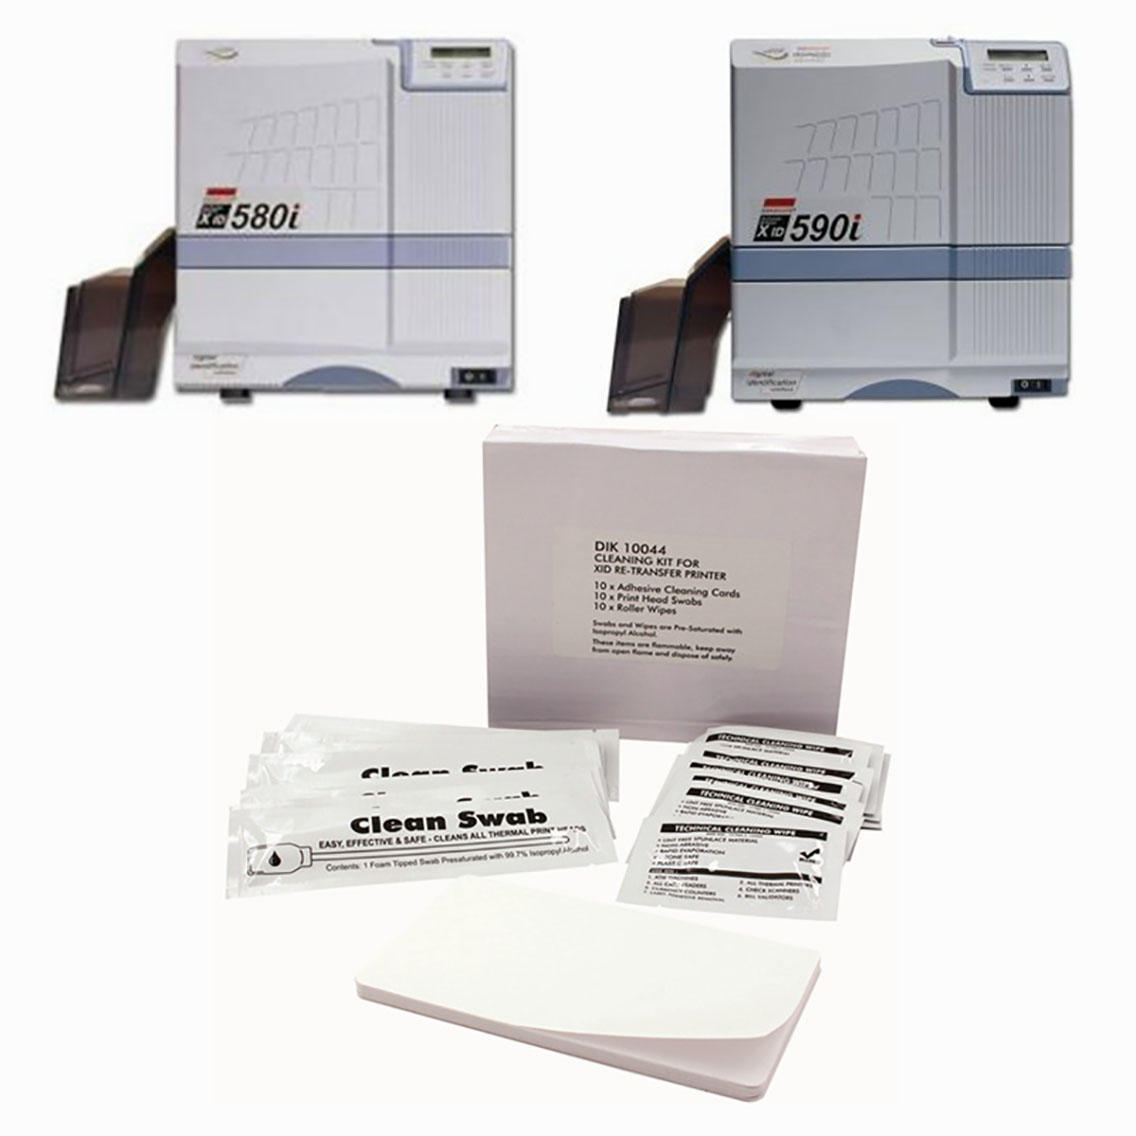 Cleanmo cost effective inkjet printhead cleaning kit manufacturer for XID 580i printer-3